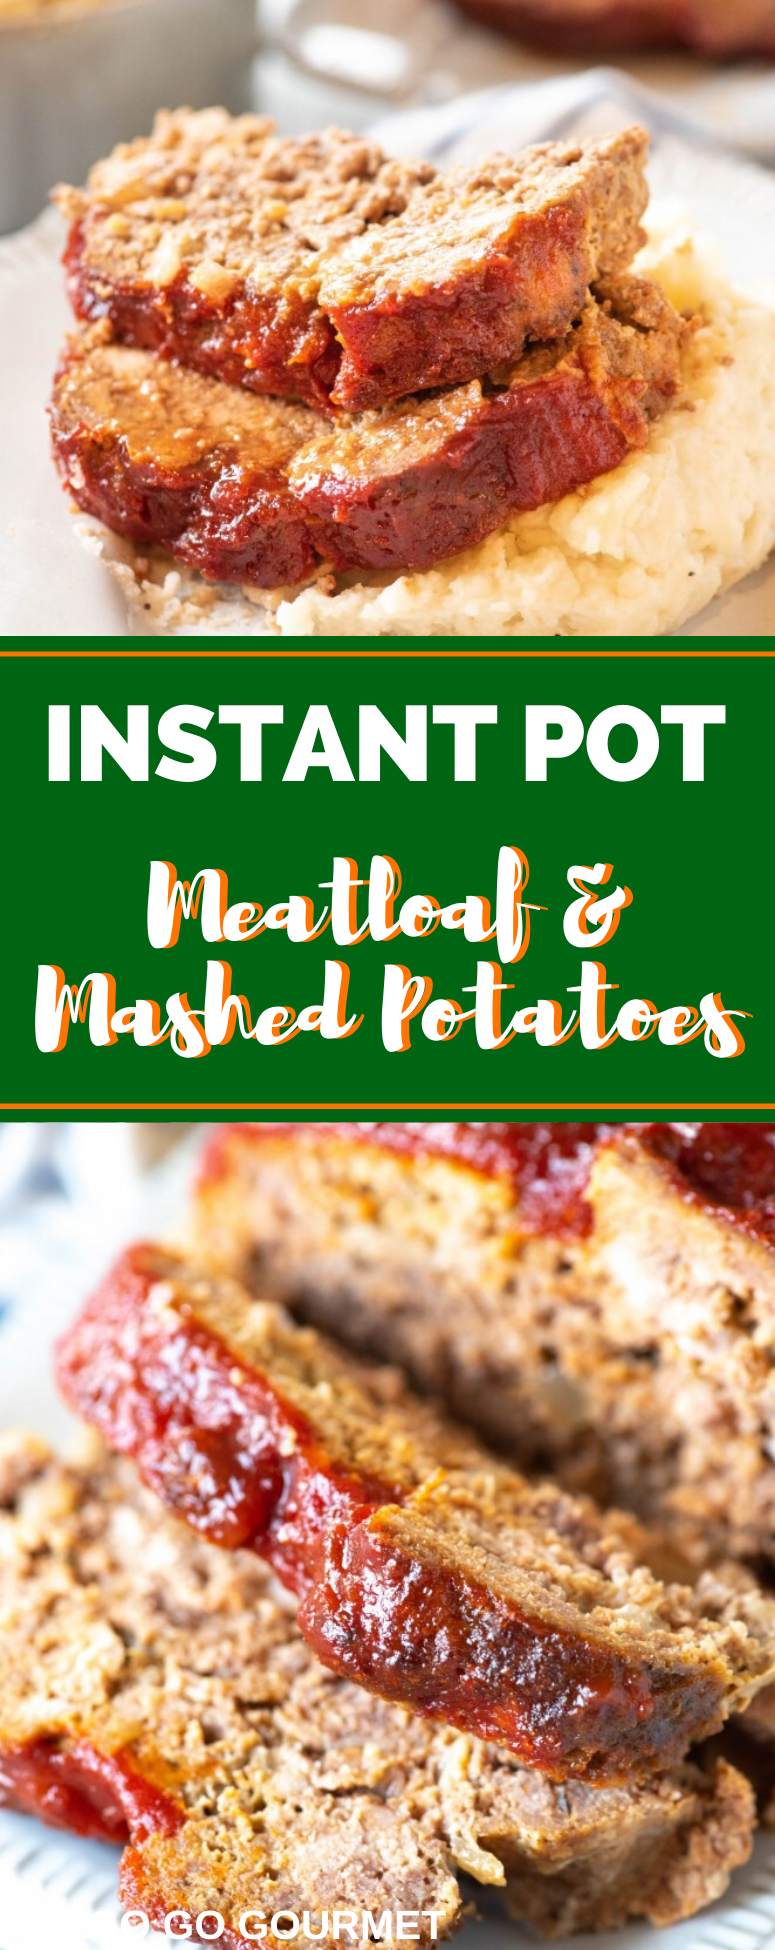 This easy Instant Pot Meatloaf and Mashed Potatoes recipe is the best! It's an easy way to make an entire comfort food meal in under an hour! After you've tried it, this will be the only meatloaf recipe you'll ever use! Pressure cooking has never been so easy! #gogogogourmet #instantpotmeatloaf #meatloafandmashedpotatoes #easyinstantpotrecipes #comfortfoodrecipes via @gogogogourmet